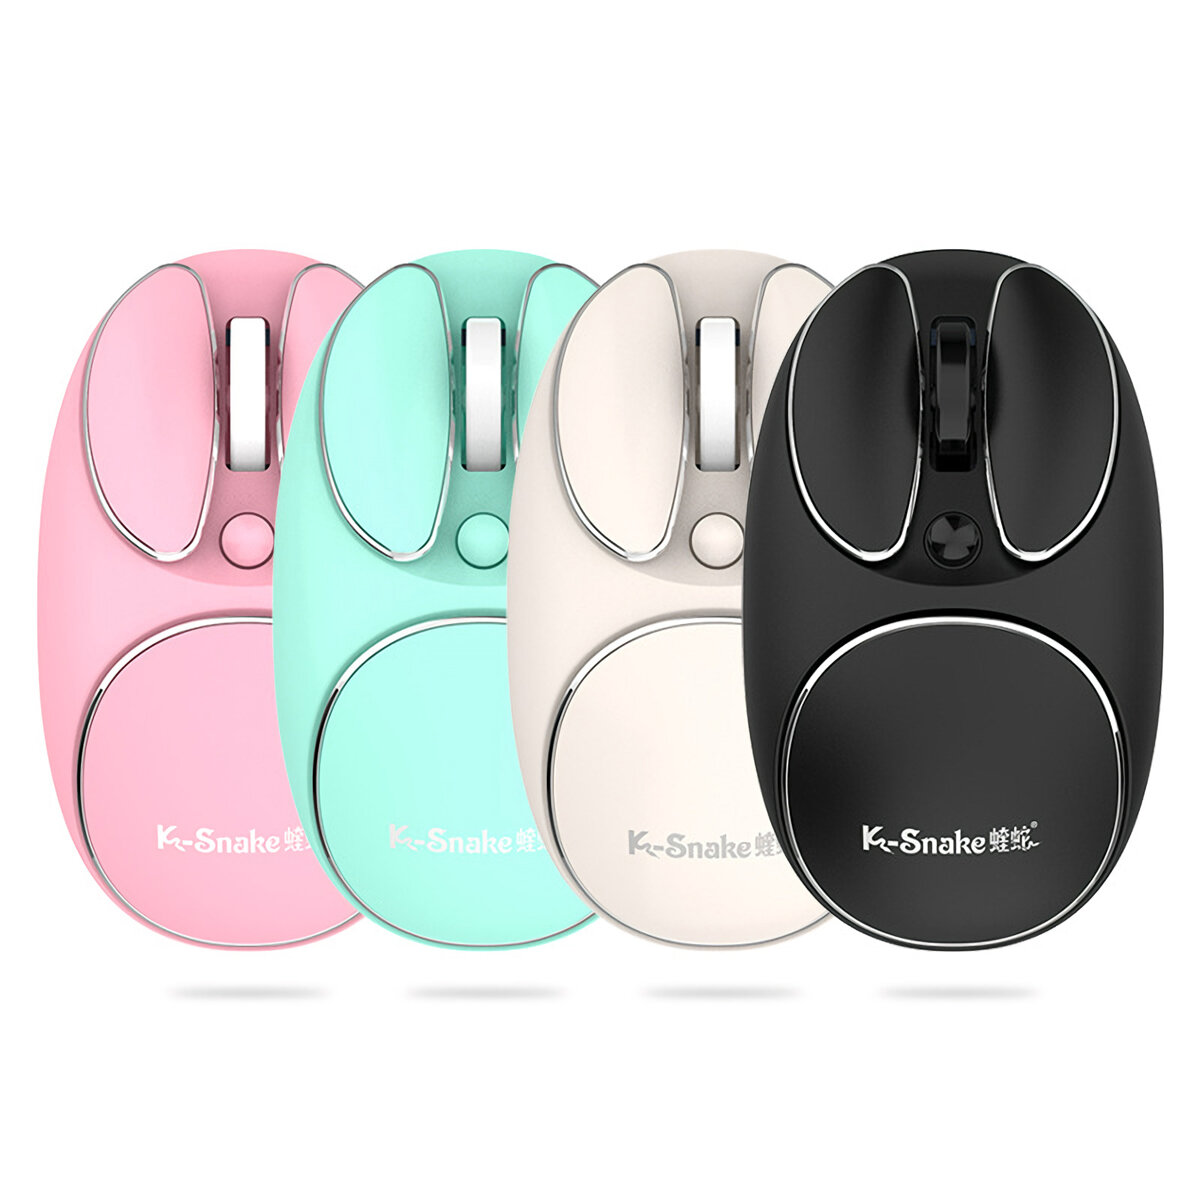 

K-Snake W520 2.4G Wireless Mouse Adjustable 800-1600DPI Rechargeable Silent Macaron Mice for Laptop PC